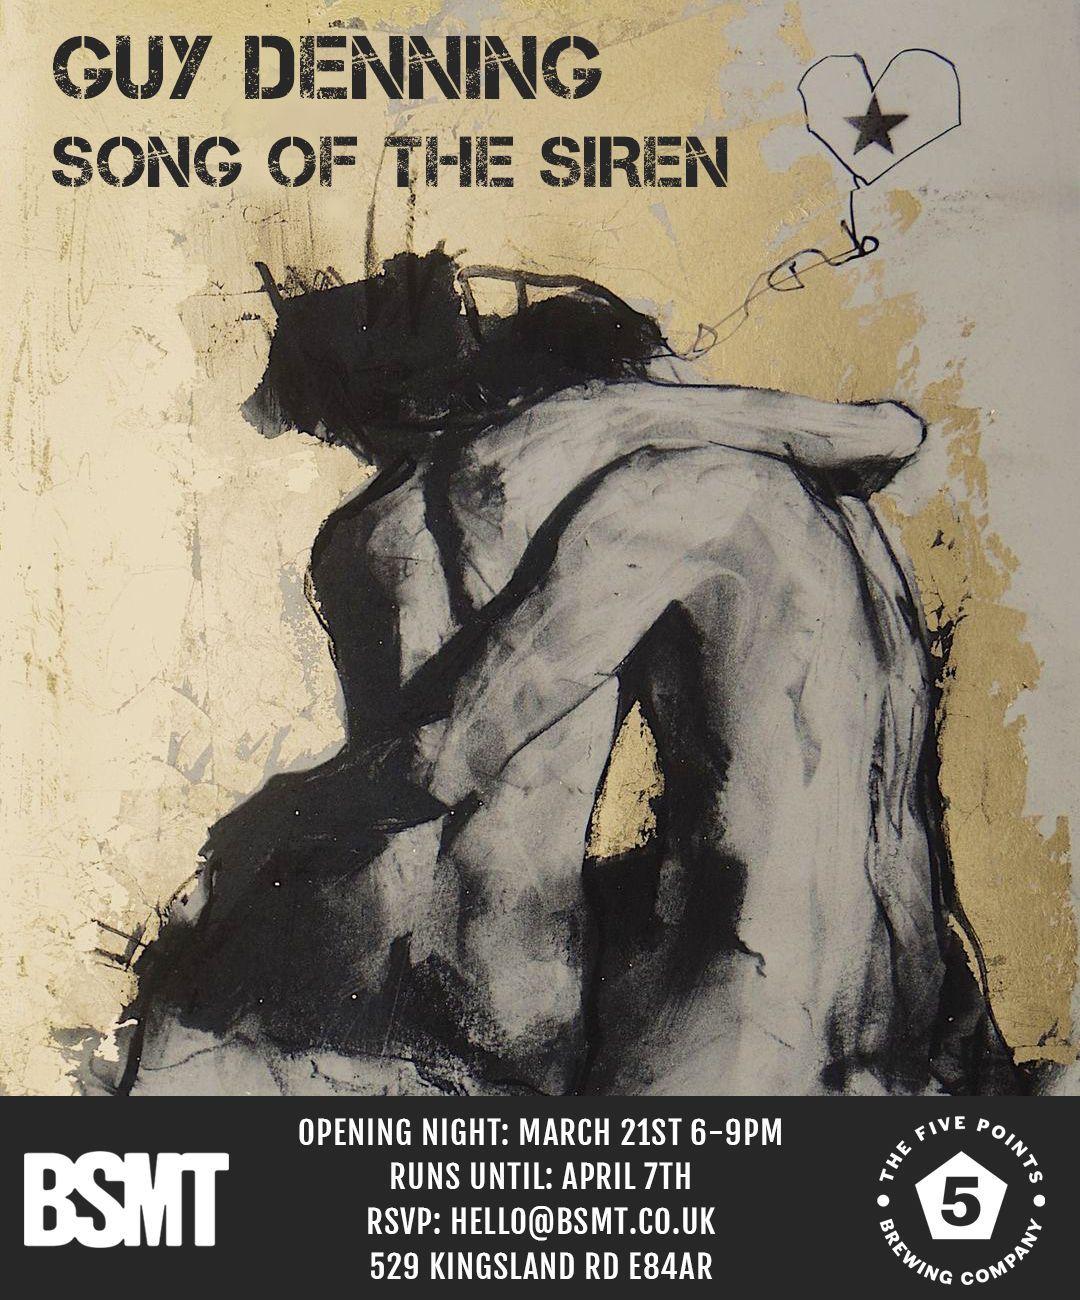 SONG OF THE SIREN' Solo Show by Guy Denning  | Guy Denning | BSMT SPACE